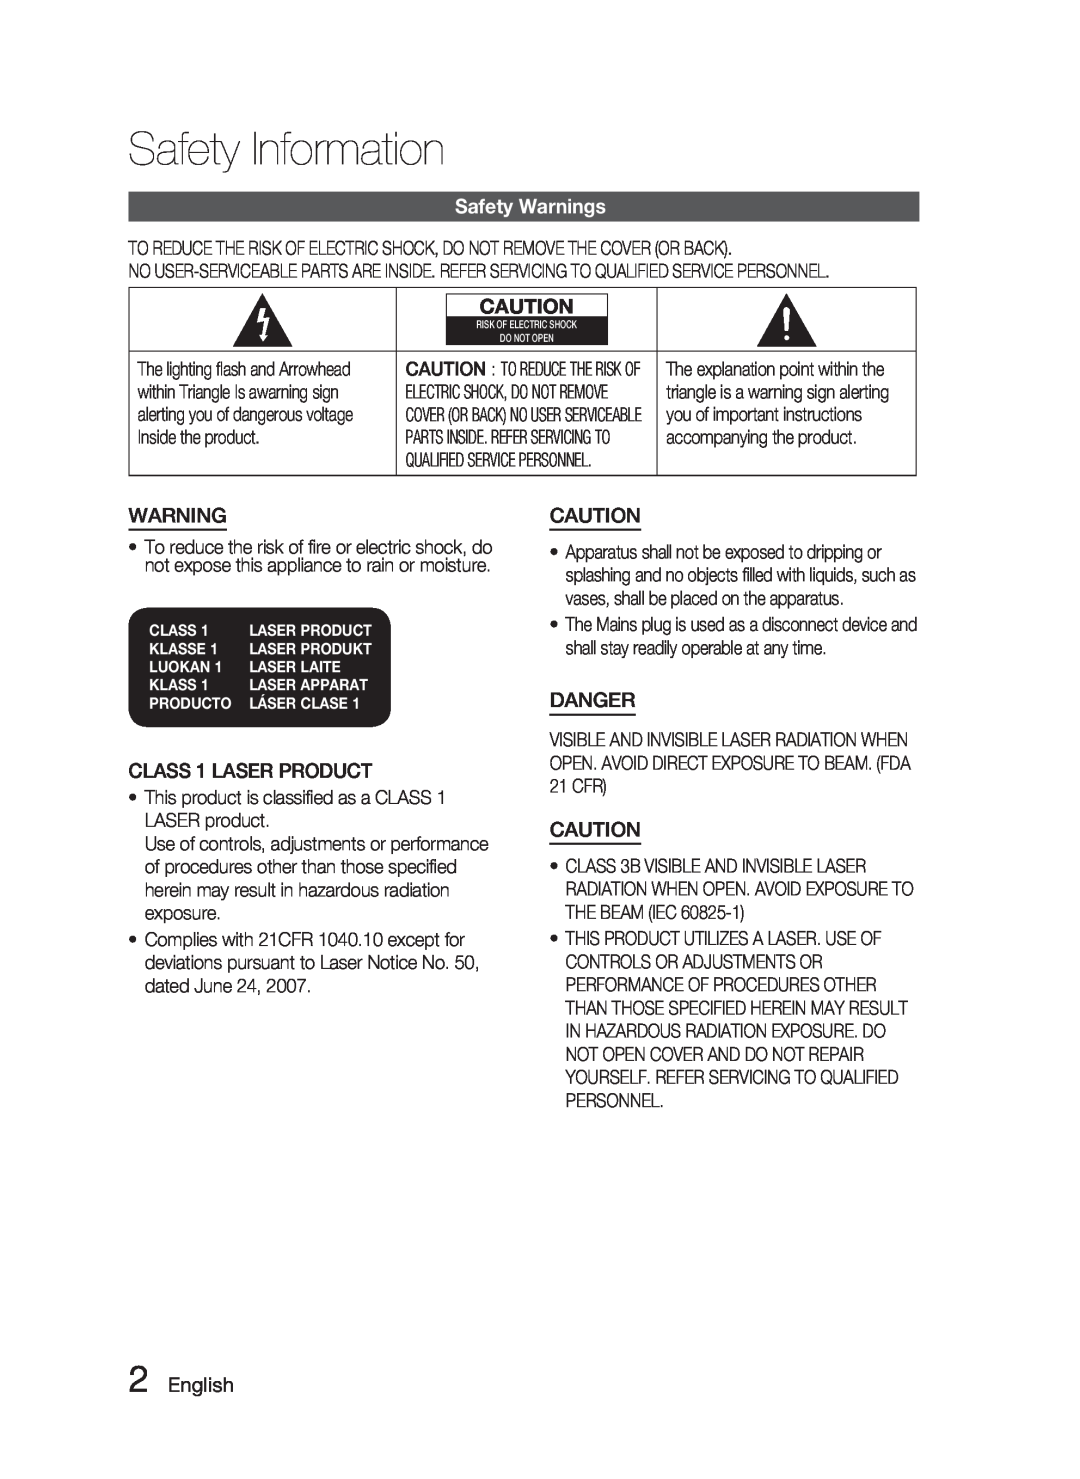 Samsung AH68-02279Y user manual Safety Information, Safety Warnings, CLASS 1 LASER PRODUCT, Danger, English 